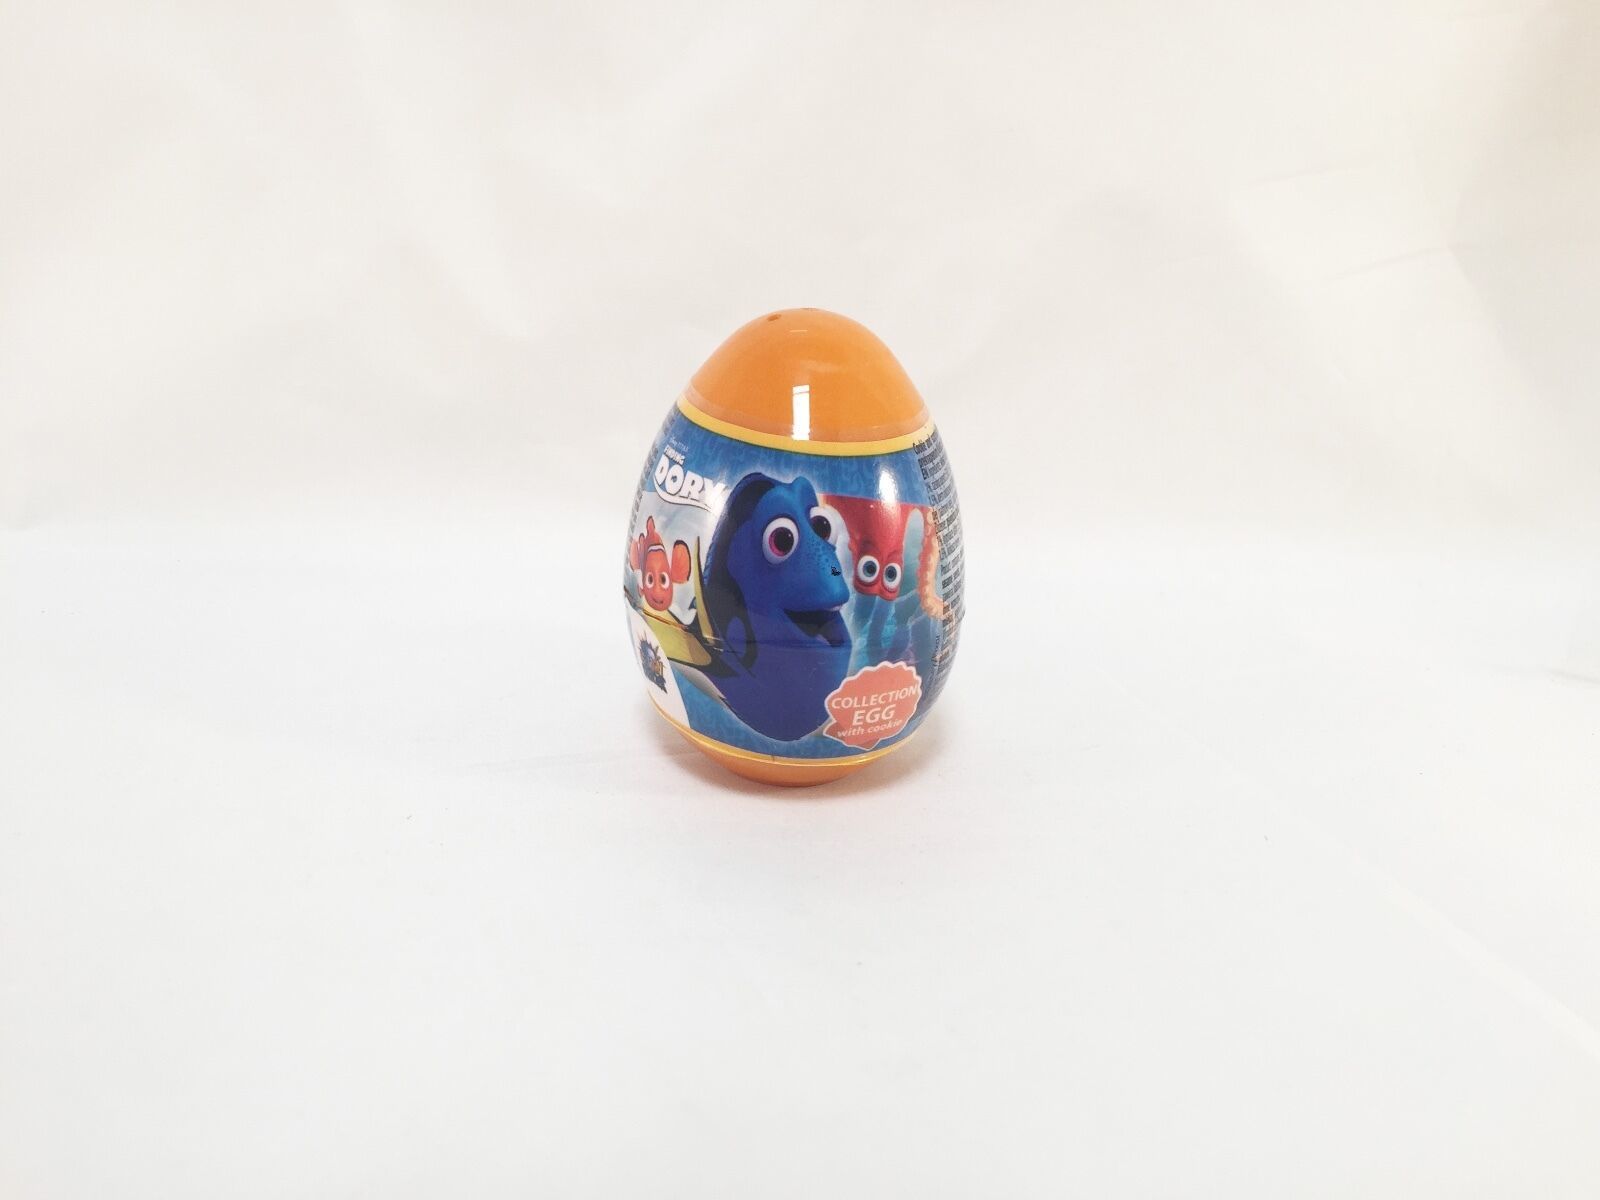 Disney PIXAR Finding DORY plastic Surprise egg with toy and candy -1 egg - - $4.70